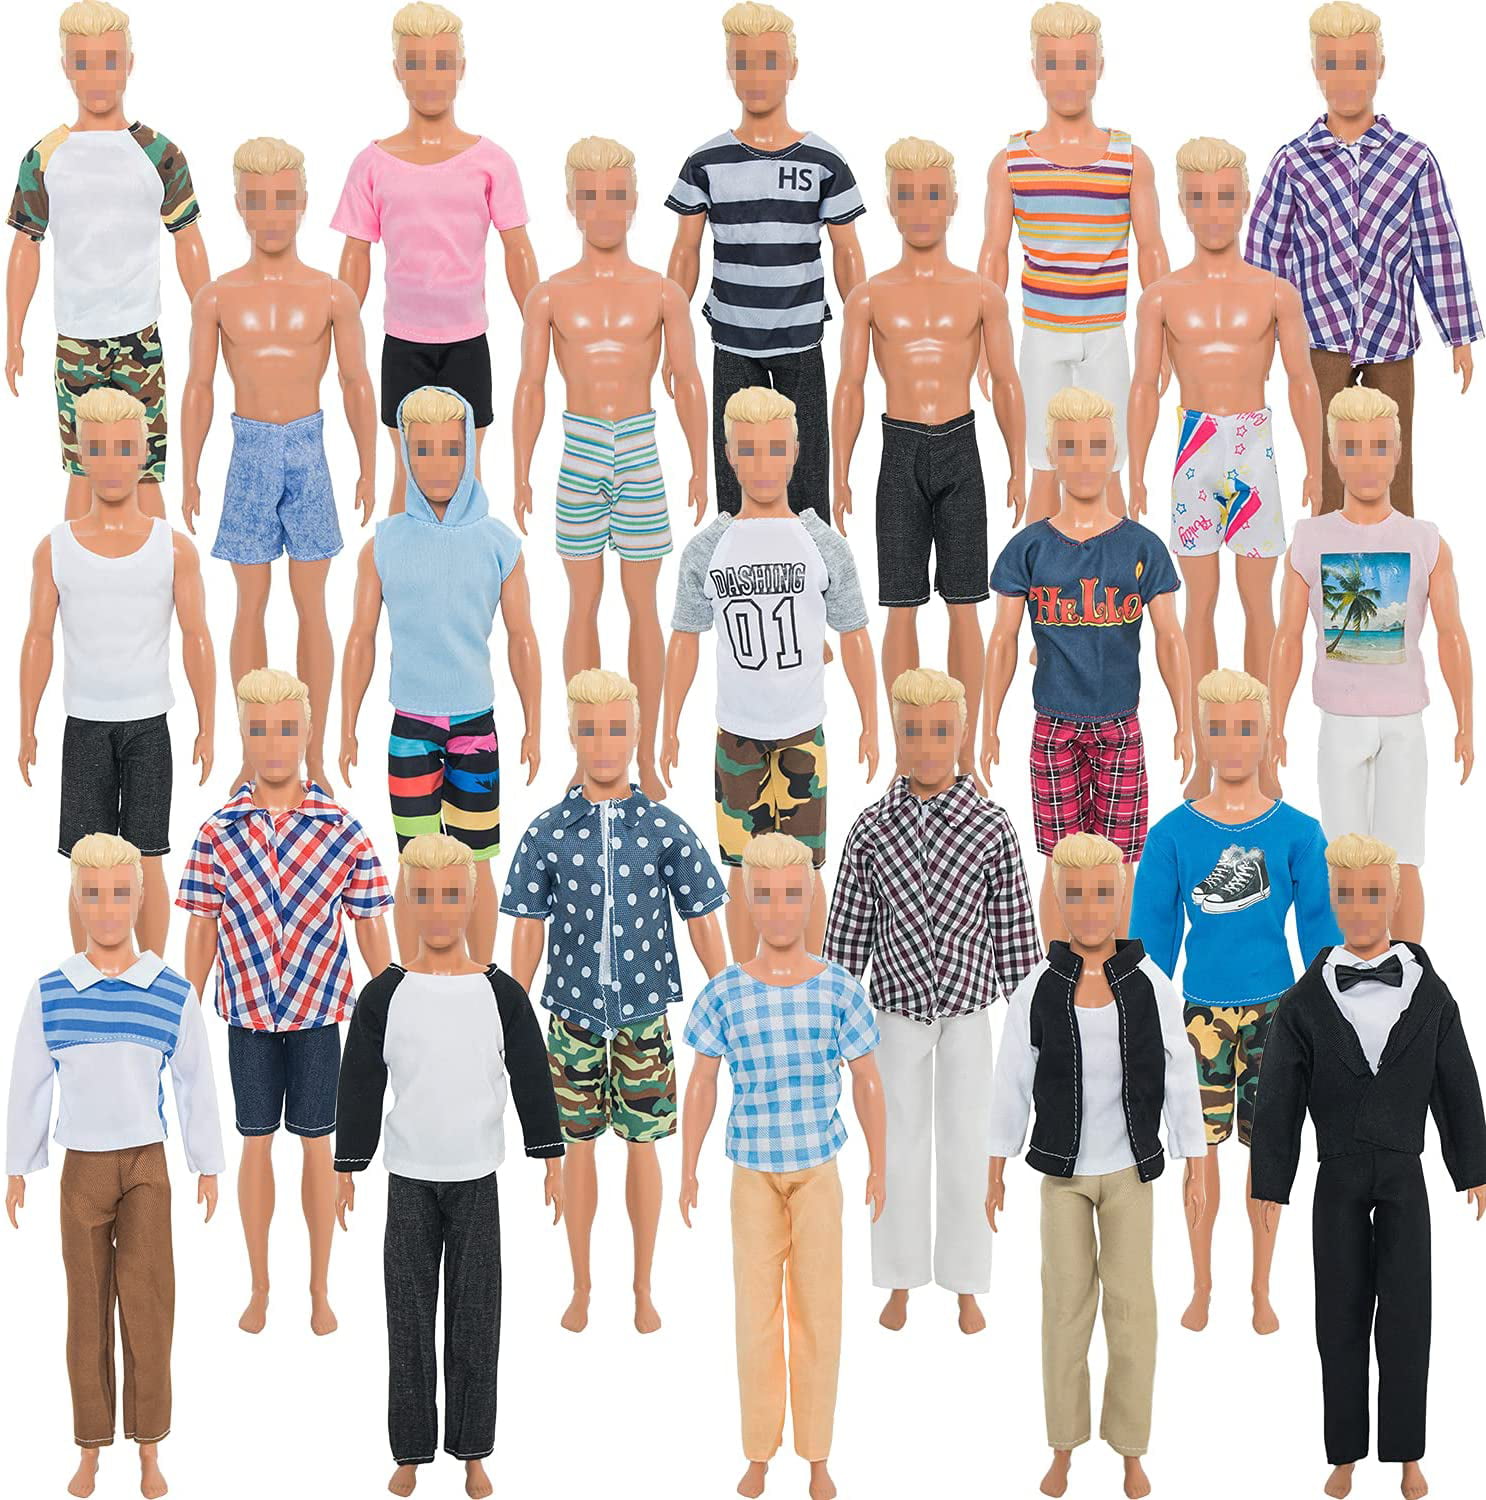 42 Pieces Kens Clothes and Accessories for 12 Inch Boy Doll Include 19 ...